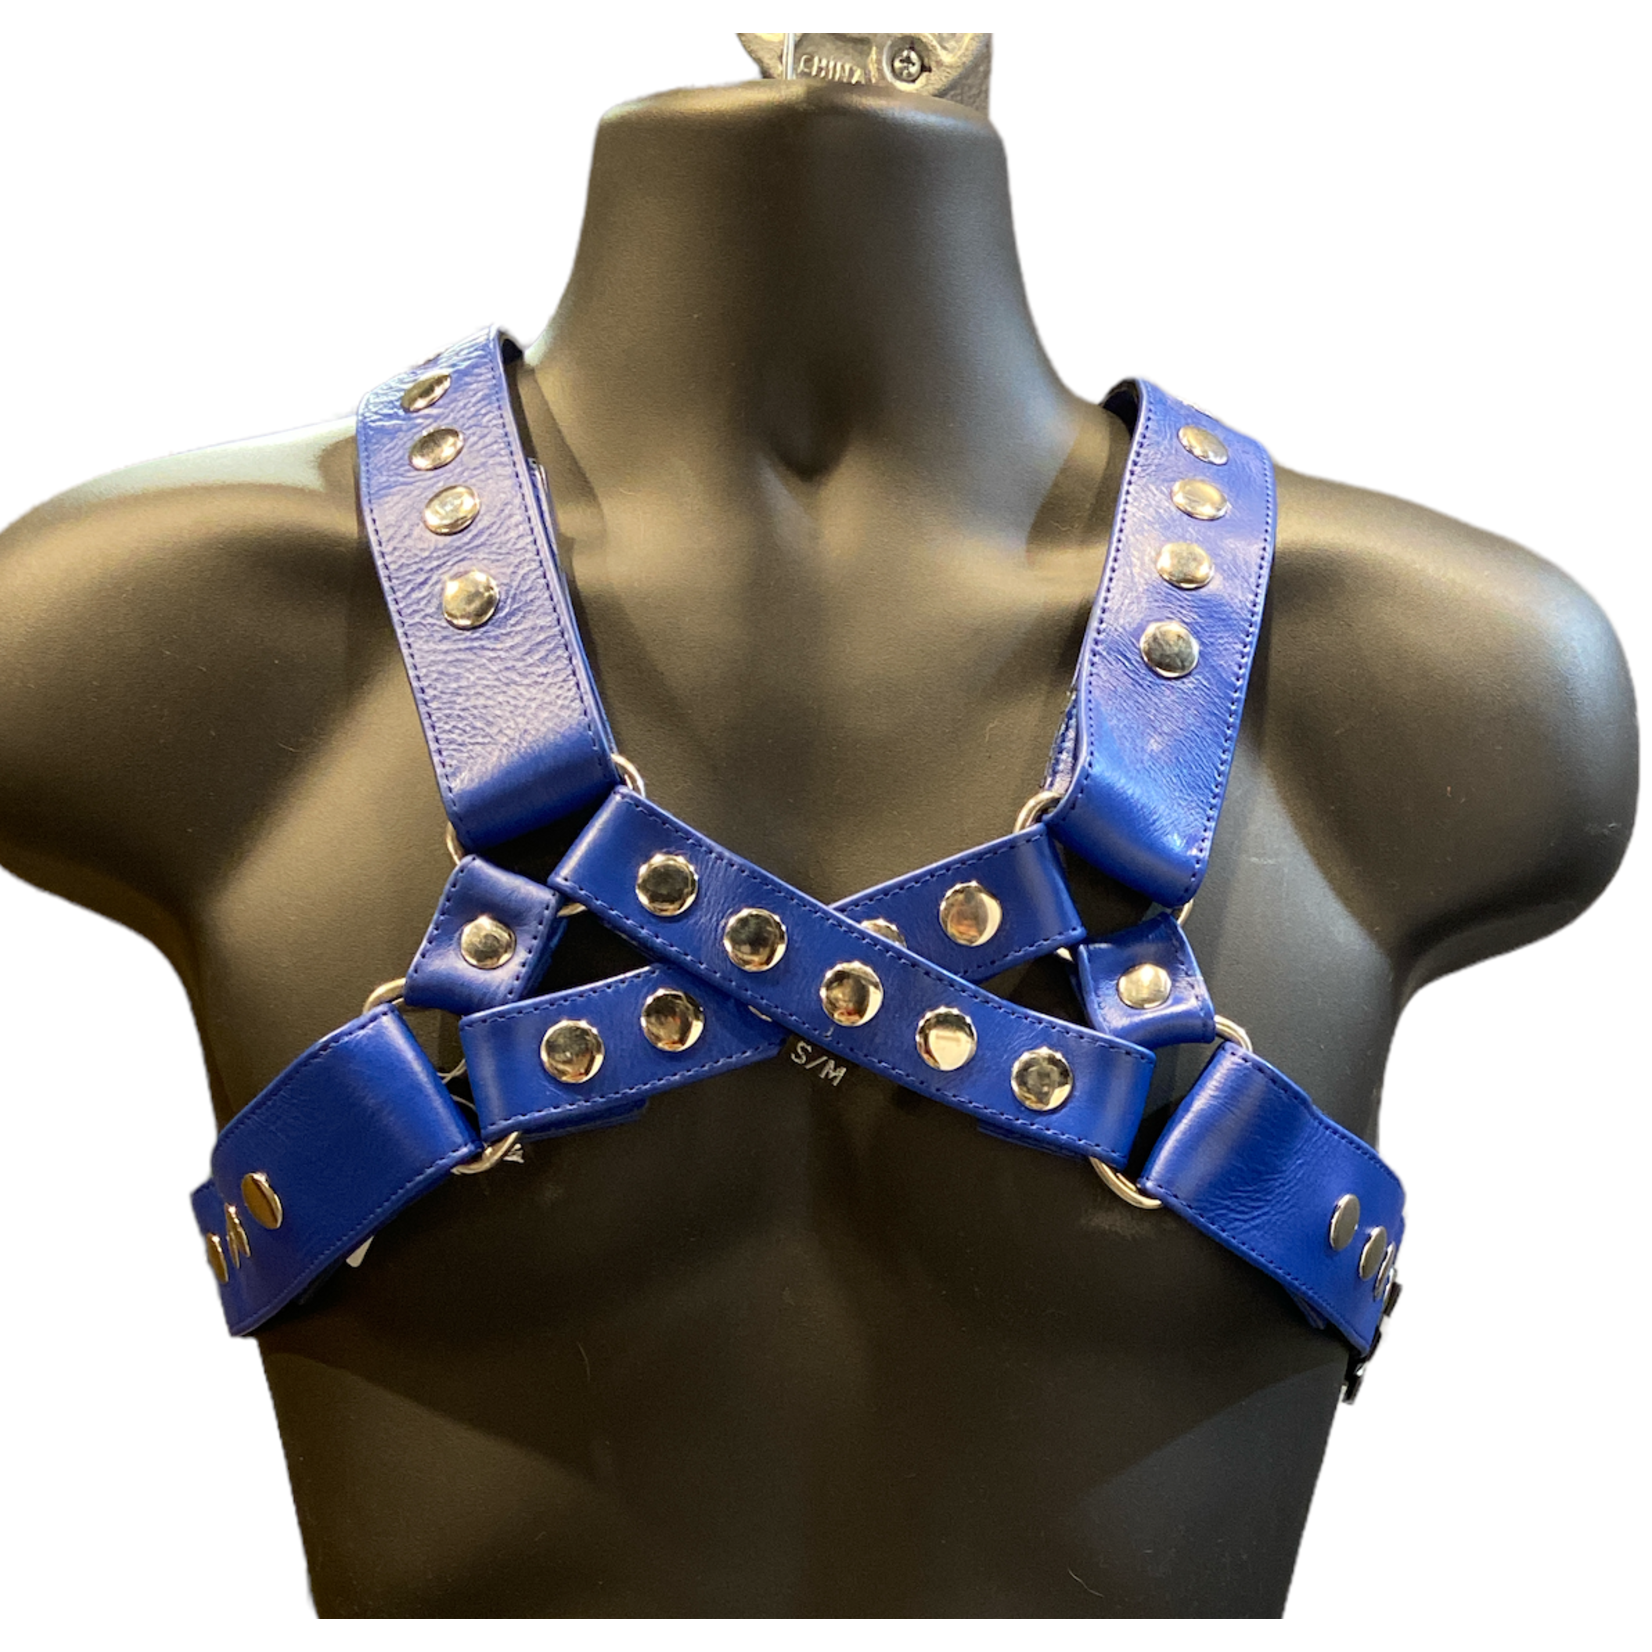 MS Leather Cross Chest Harness